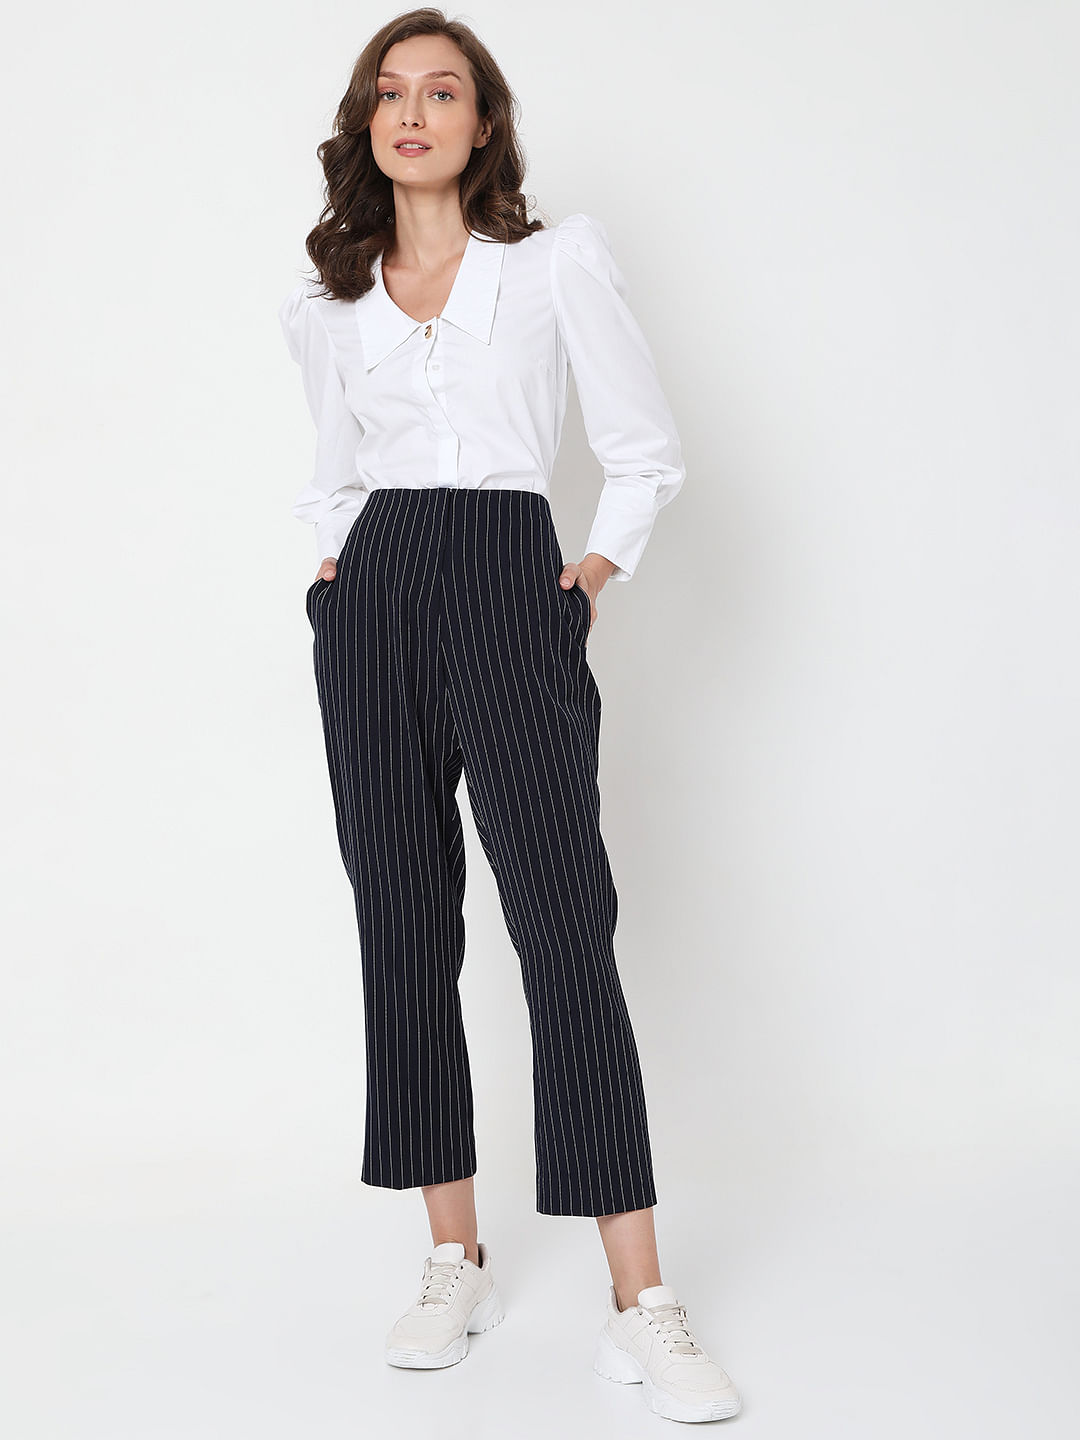 Which color top goes best with blue stripped trouser  Quora